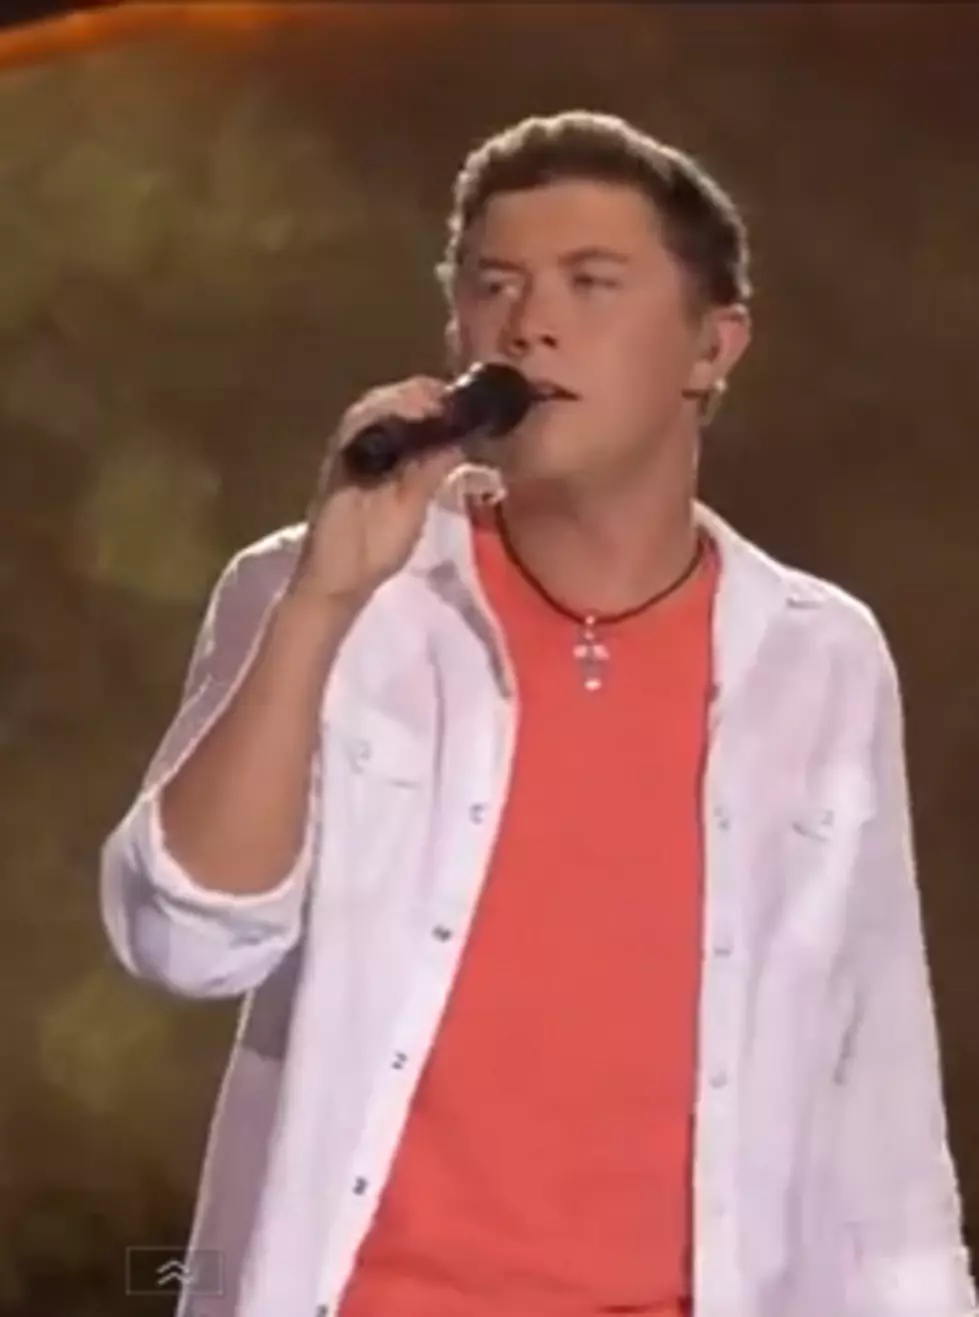 Scotty McCreery Performs “See Ya Tonight” on “A Capital Fourth” (Video)